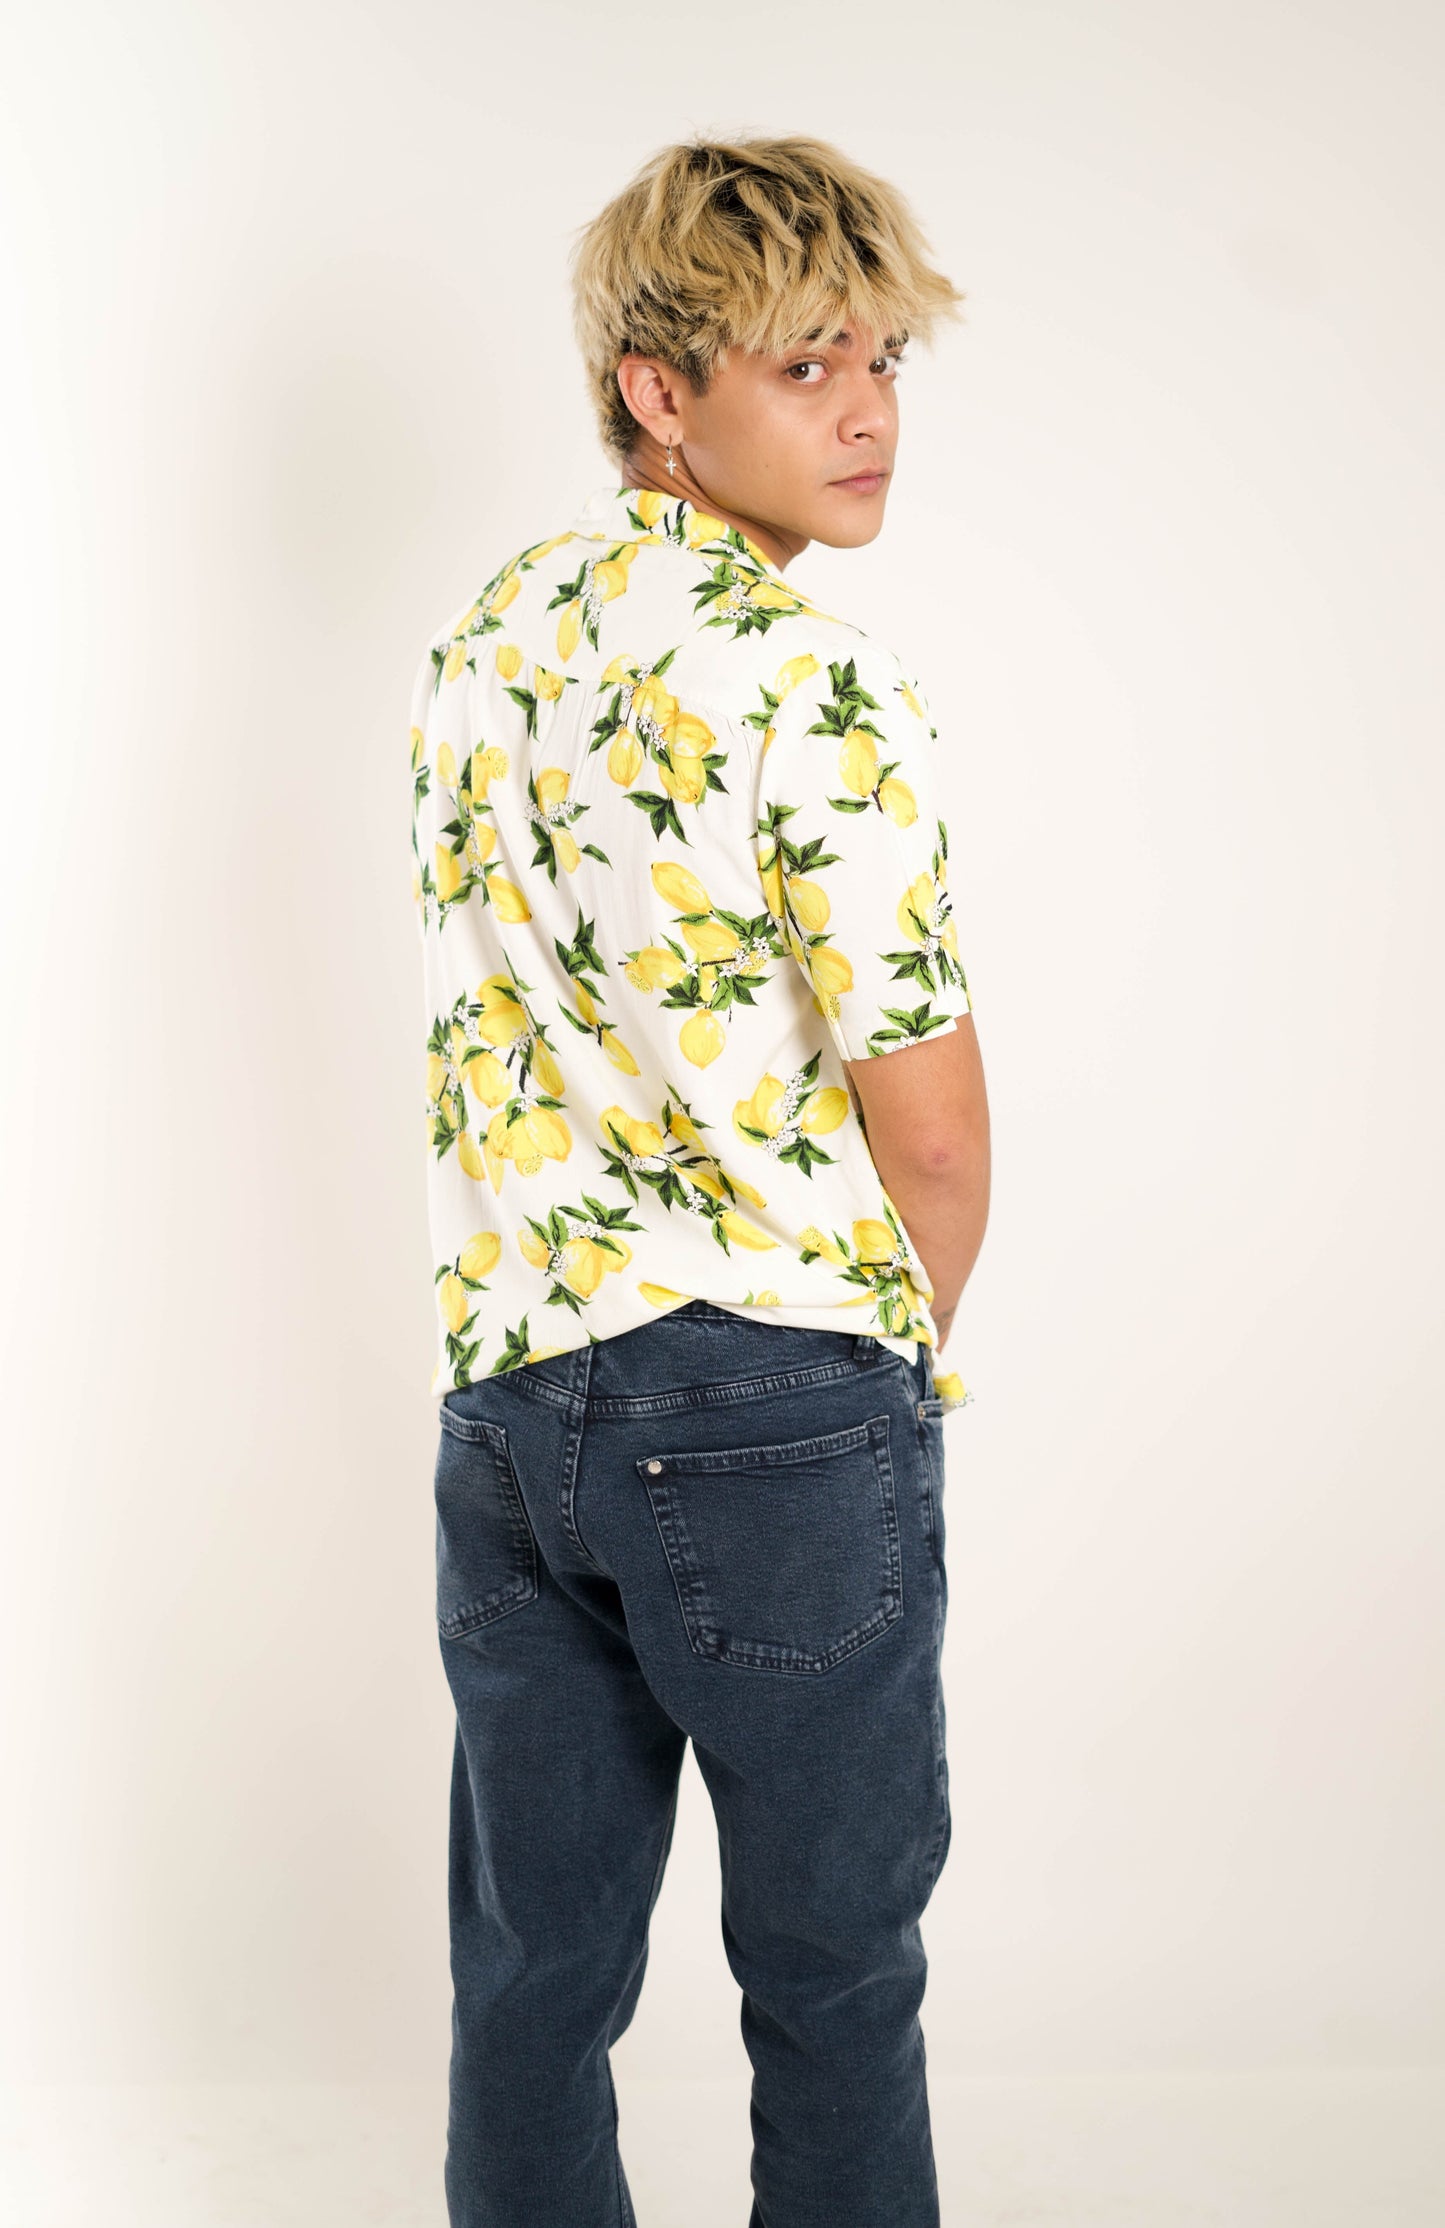 Men's Relaxed Fit Short Sleeves Squizzy Lemon Printed White Shirt